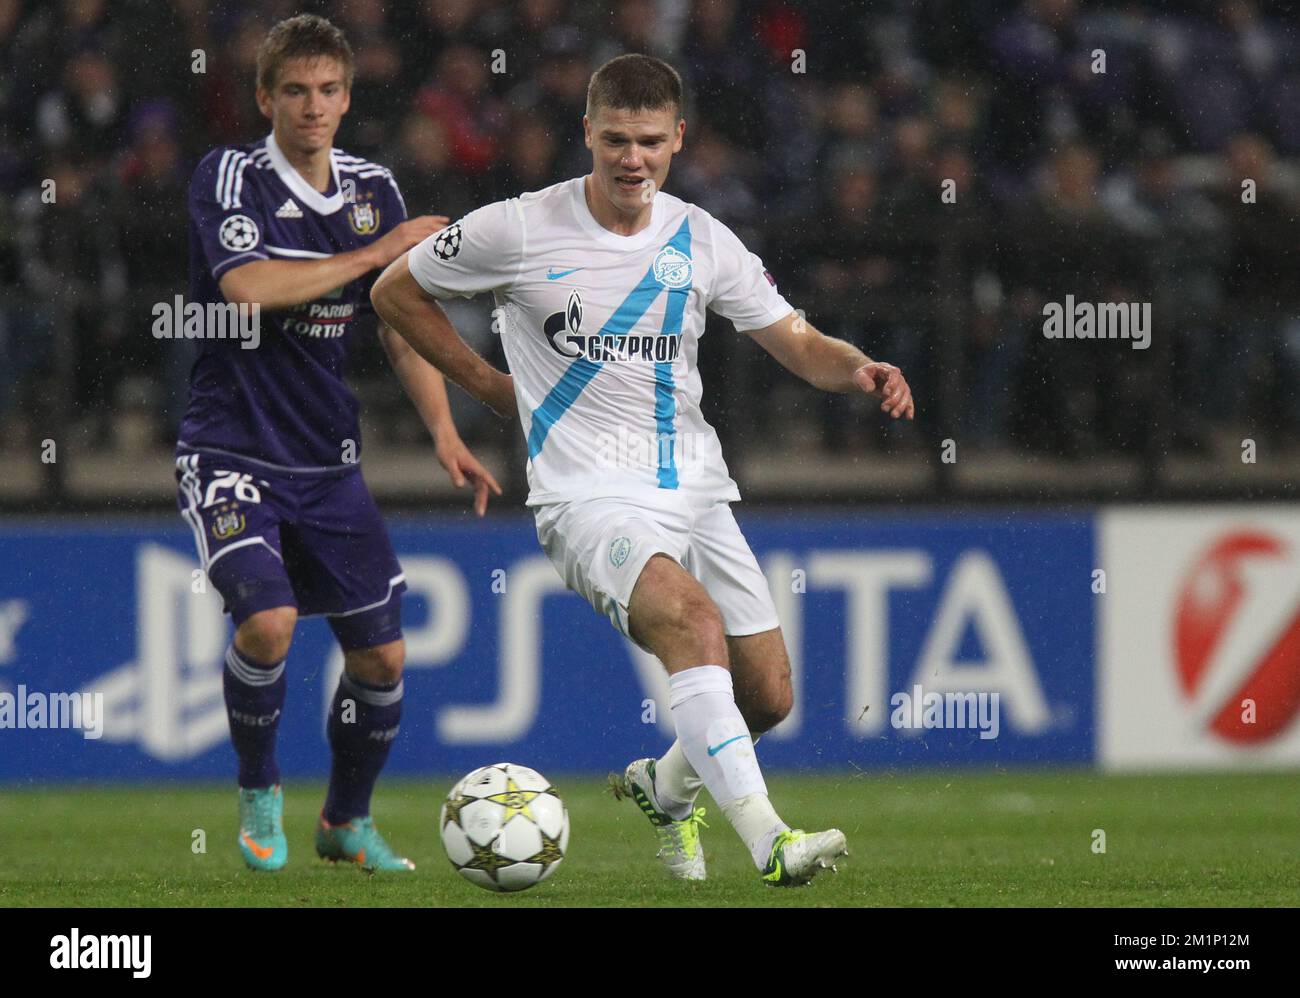 20121106 - BRUSSELS, BELGIUM: Anderlecht's Dennis Praet and Zenit's Igor Denisov fight for the ball during the match between Belgian first division soccer team RSC Anderlecht and Russian team FC Zenit Saint Petersburg in group C of the UEFA Champions League tournament, Tuesday 06 November 2012 in Brussels. BELGA PHOTO VIRGINIE LEFOUR Stock Photo